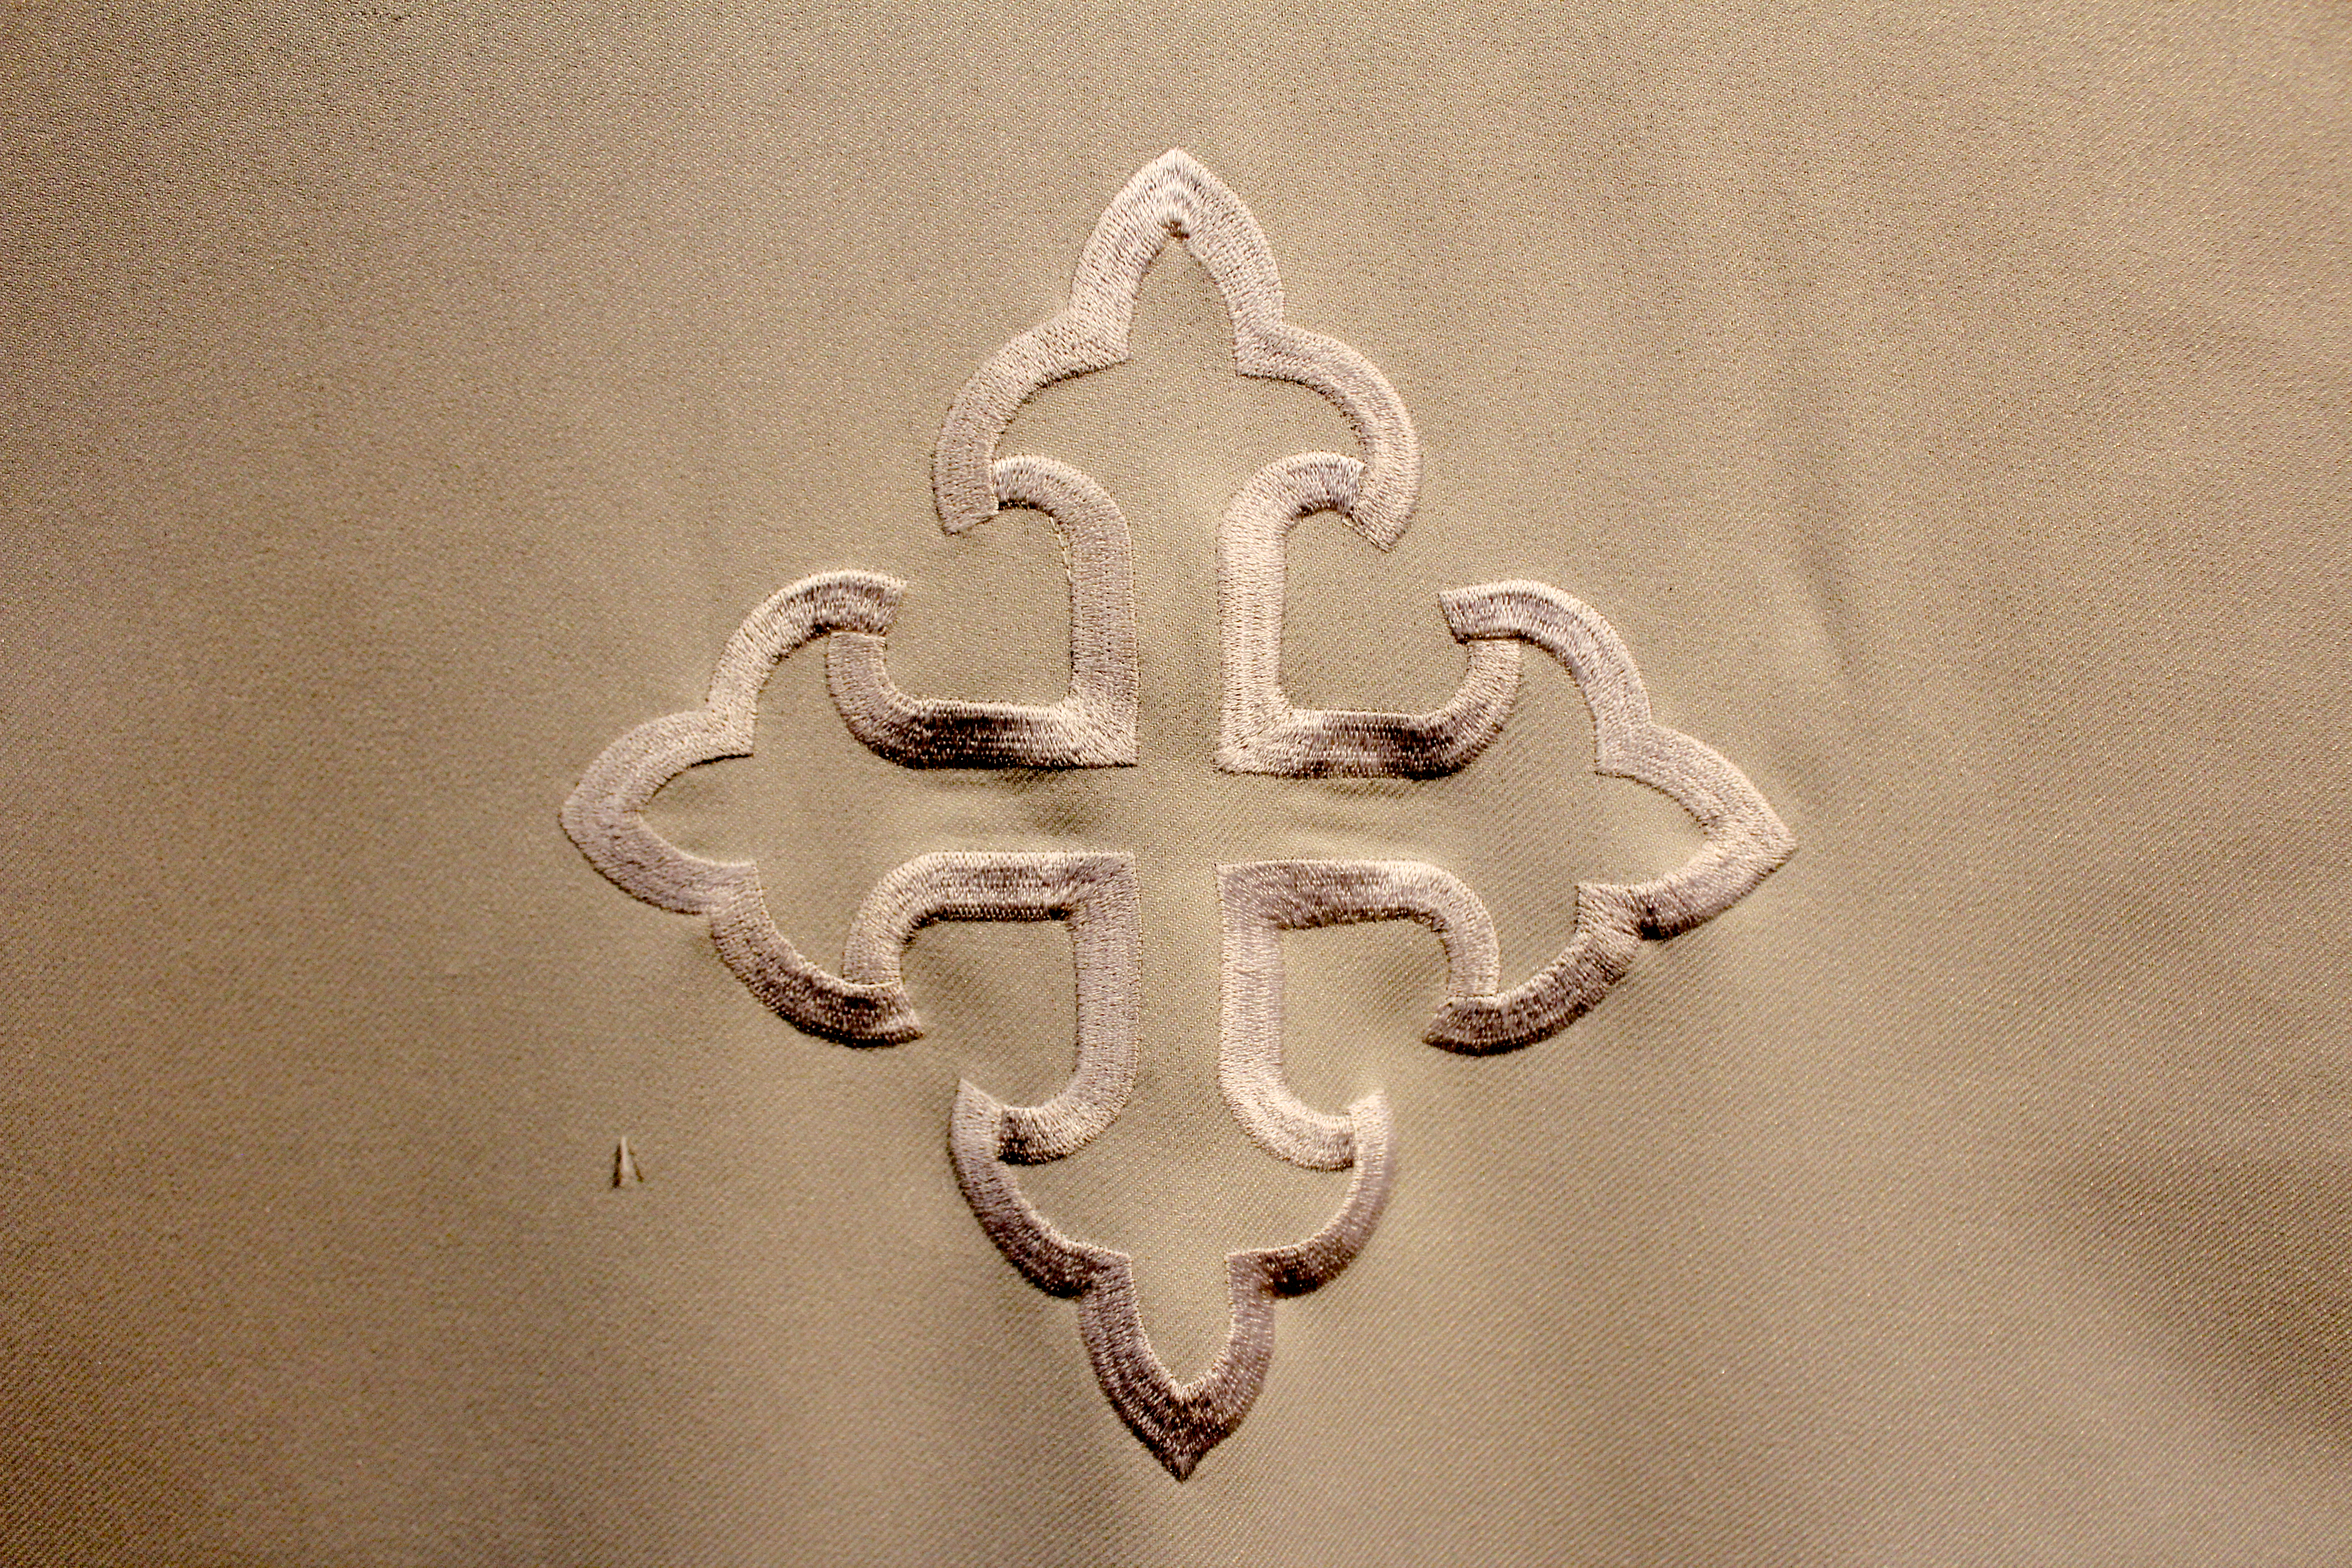 An embroidered white cross on a white cloth